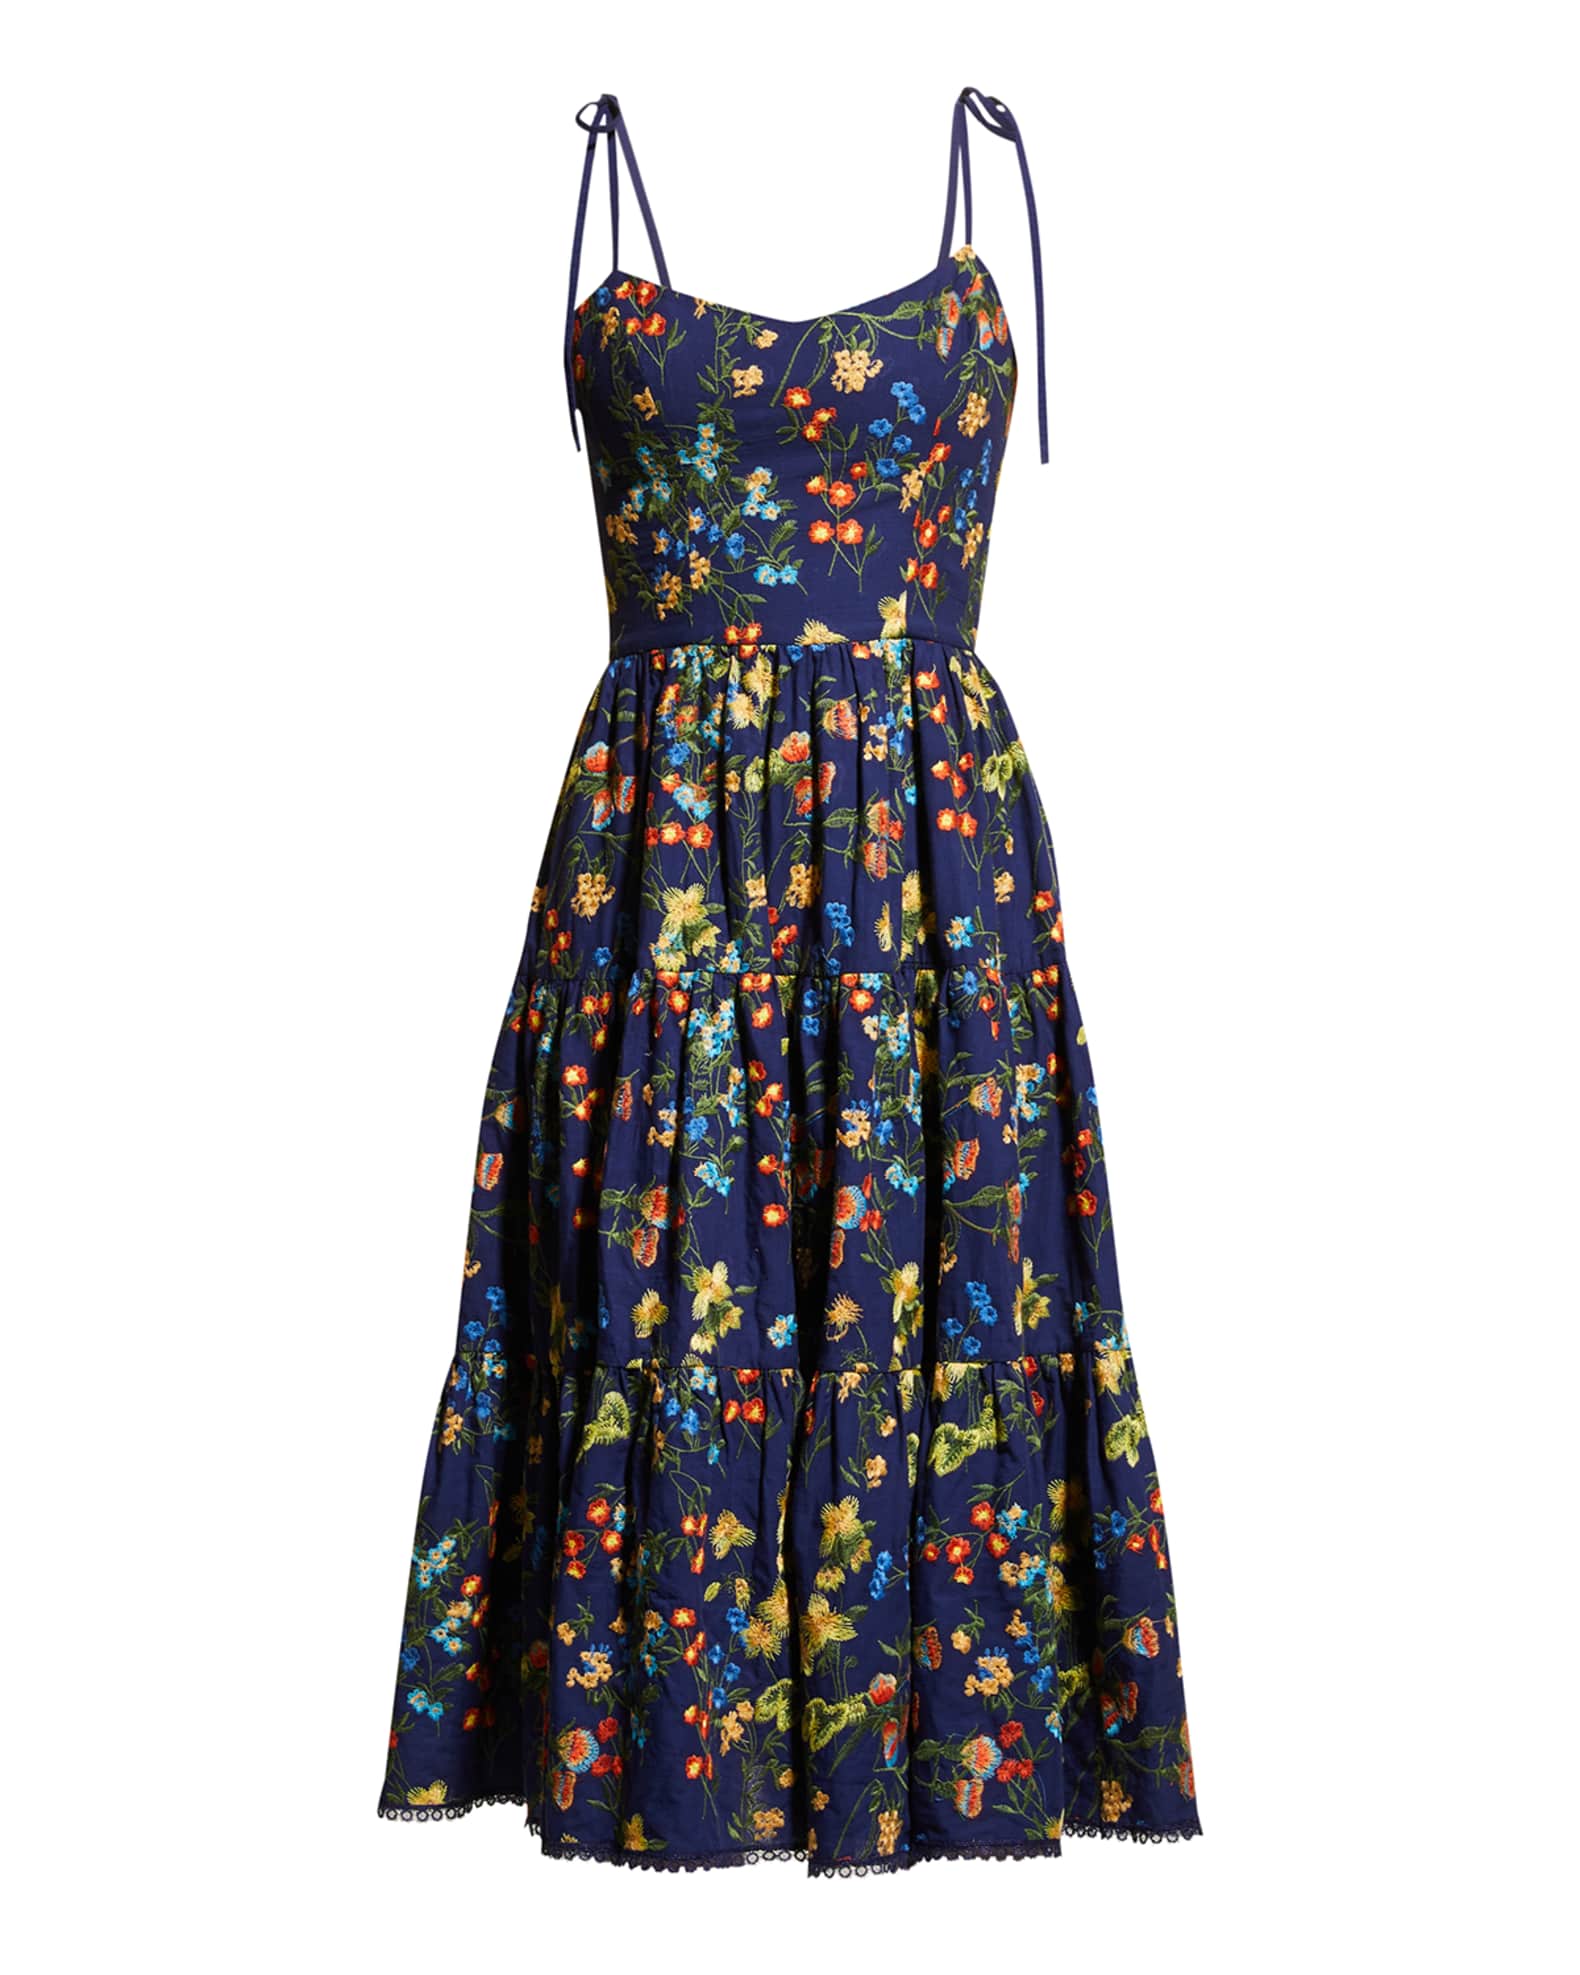 Dress The Population Dream Tiered Floral-Embroidered Dress | Neiman Marcus